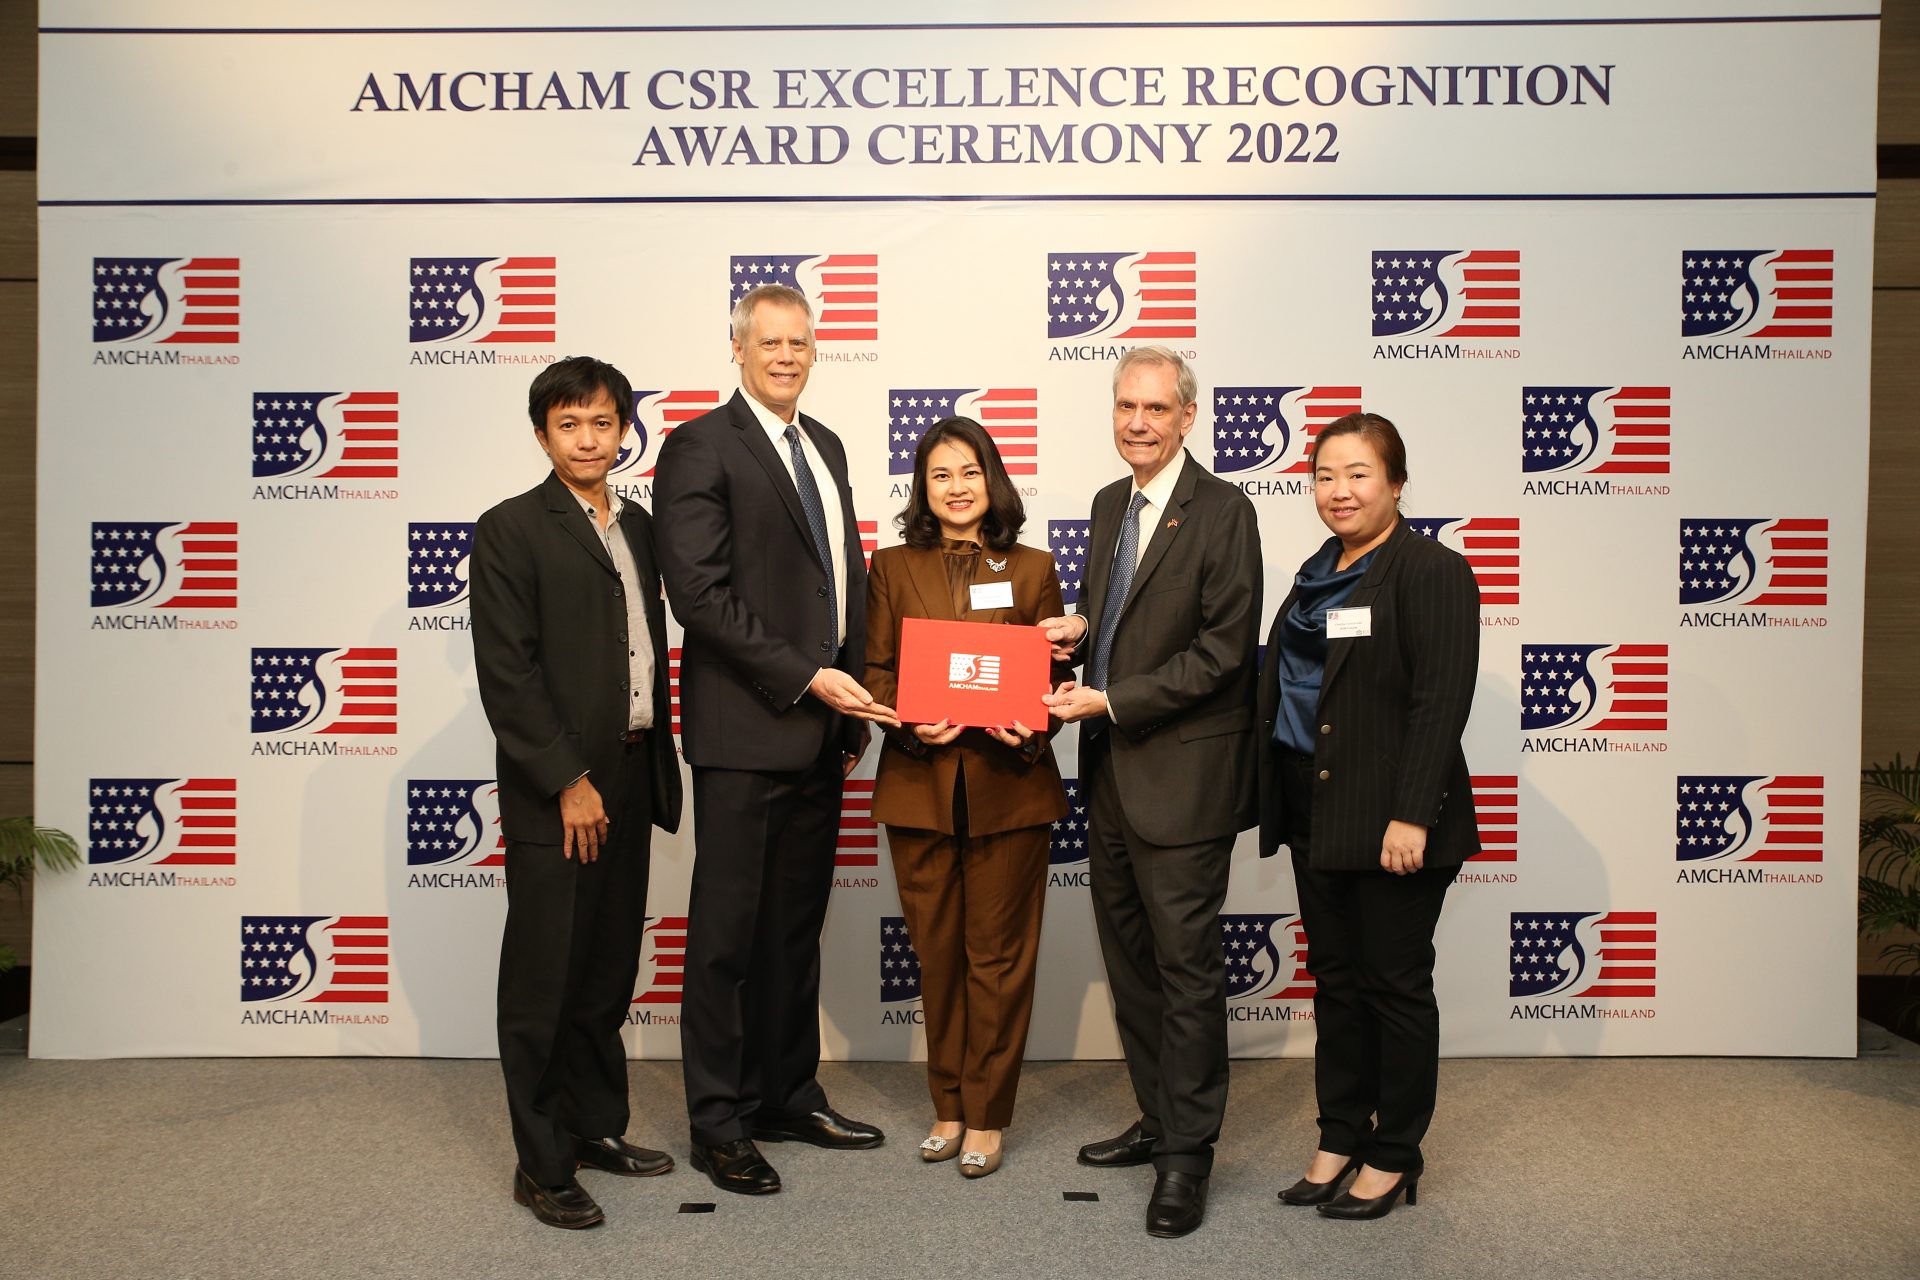 INSEE Ecocycle Receives CSR Recognition and Selected among 3 Finalists for Thai Development Award from AMCHAM